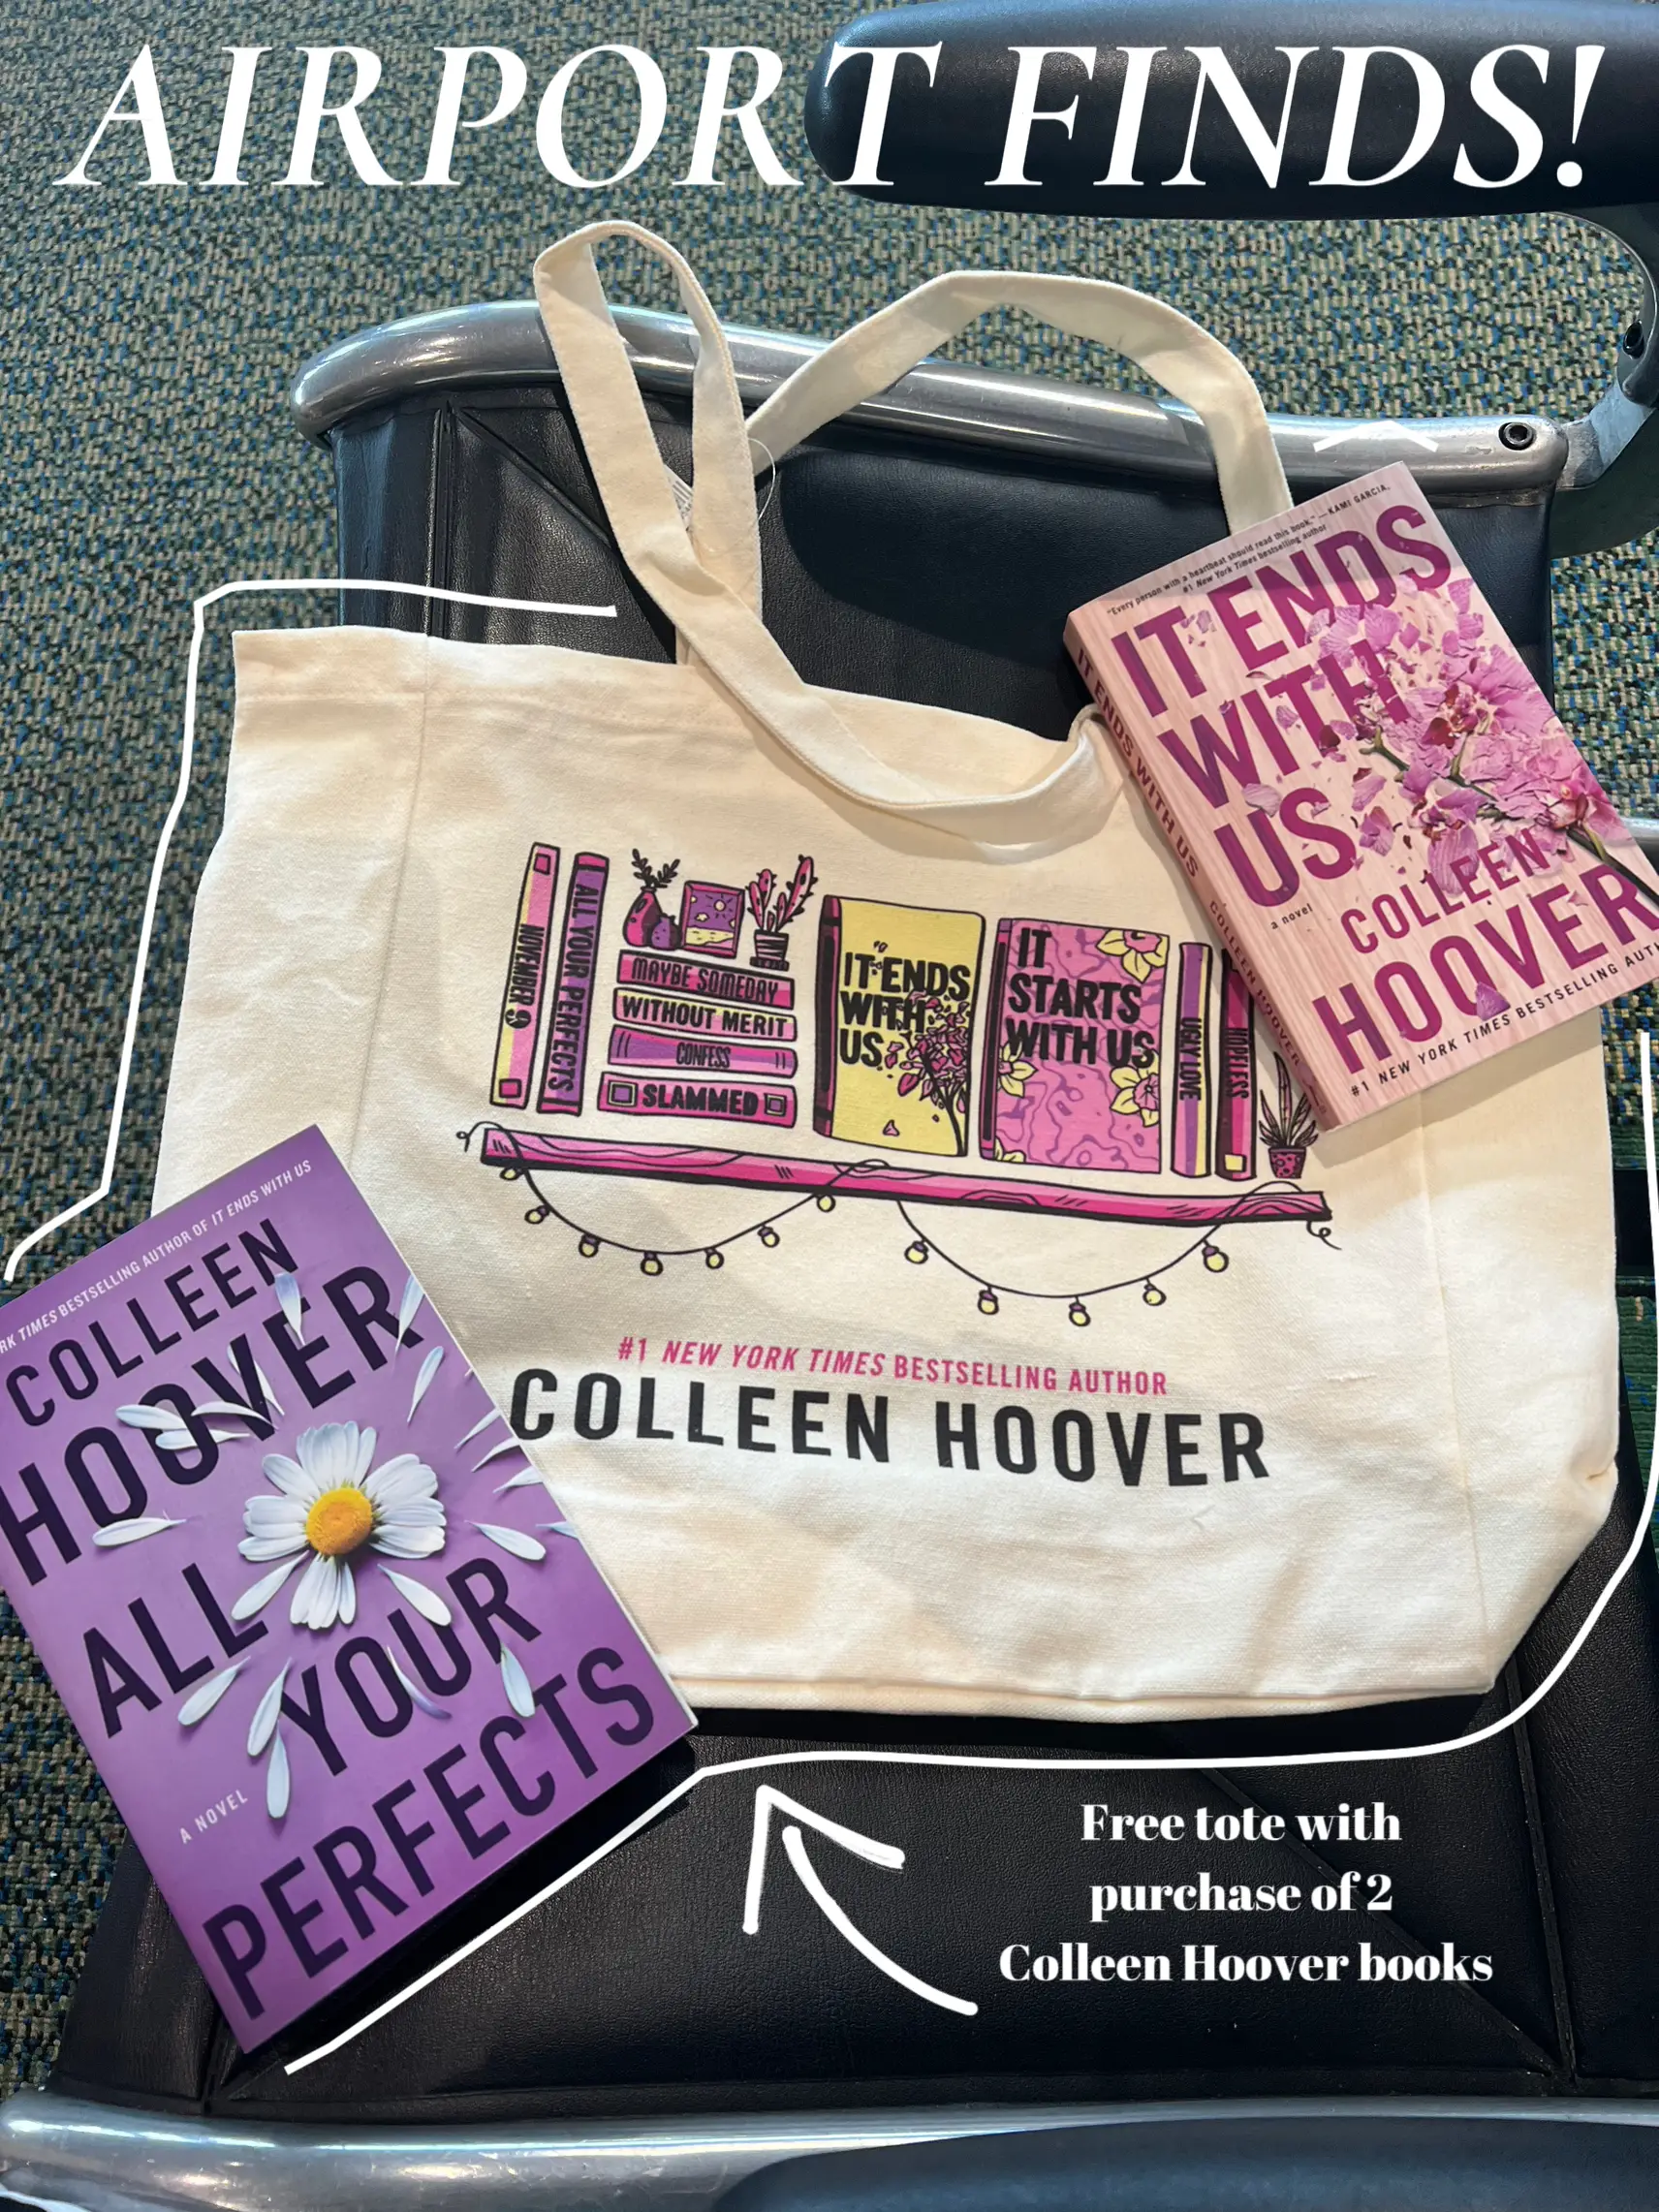 All Your Perfects By Colleen Hoover Novels Book In English #1 New York  Times Bestselling - AliExpress